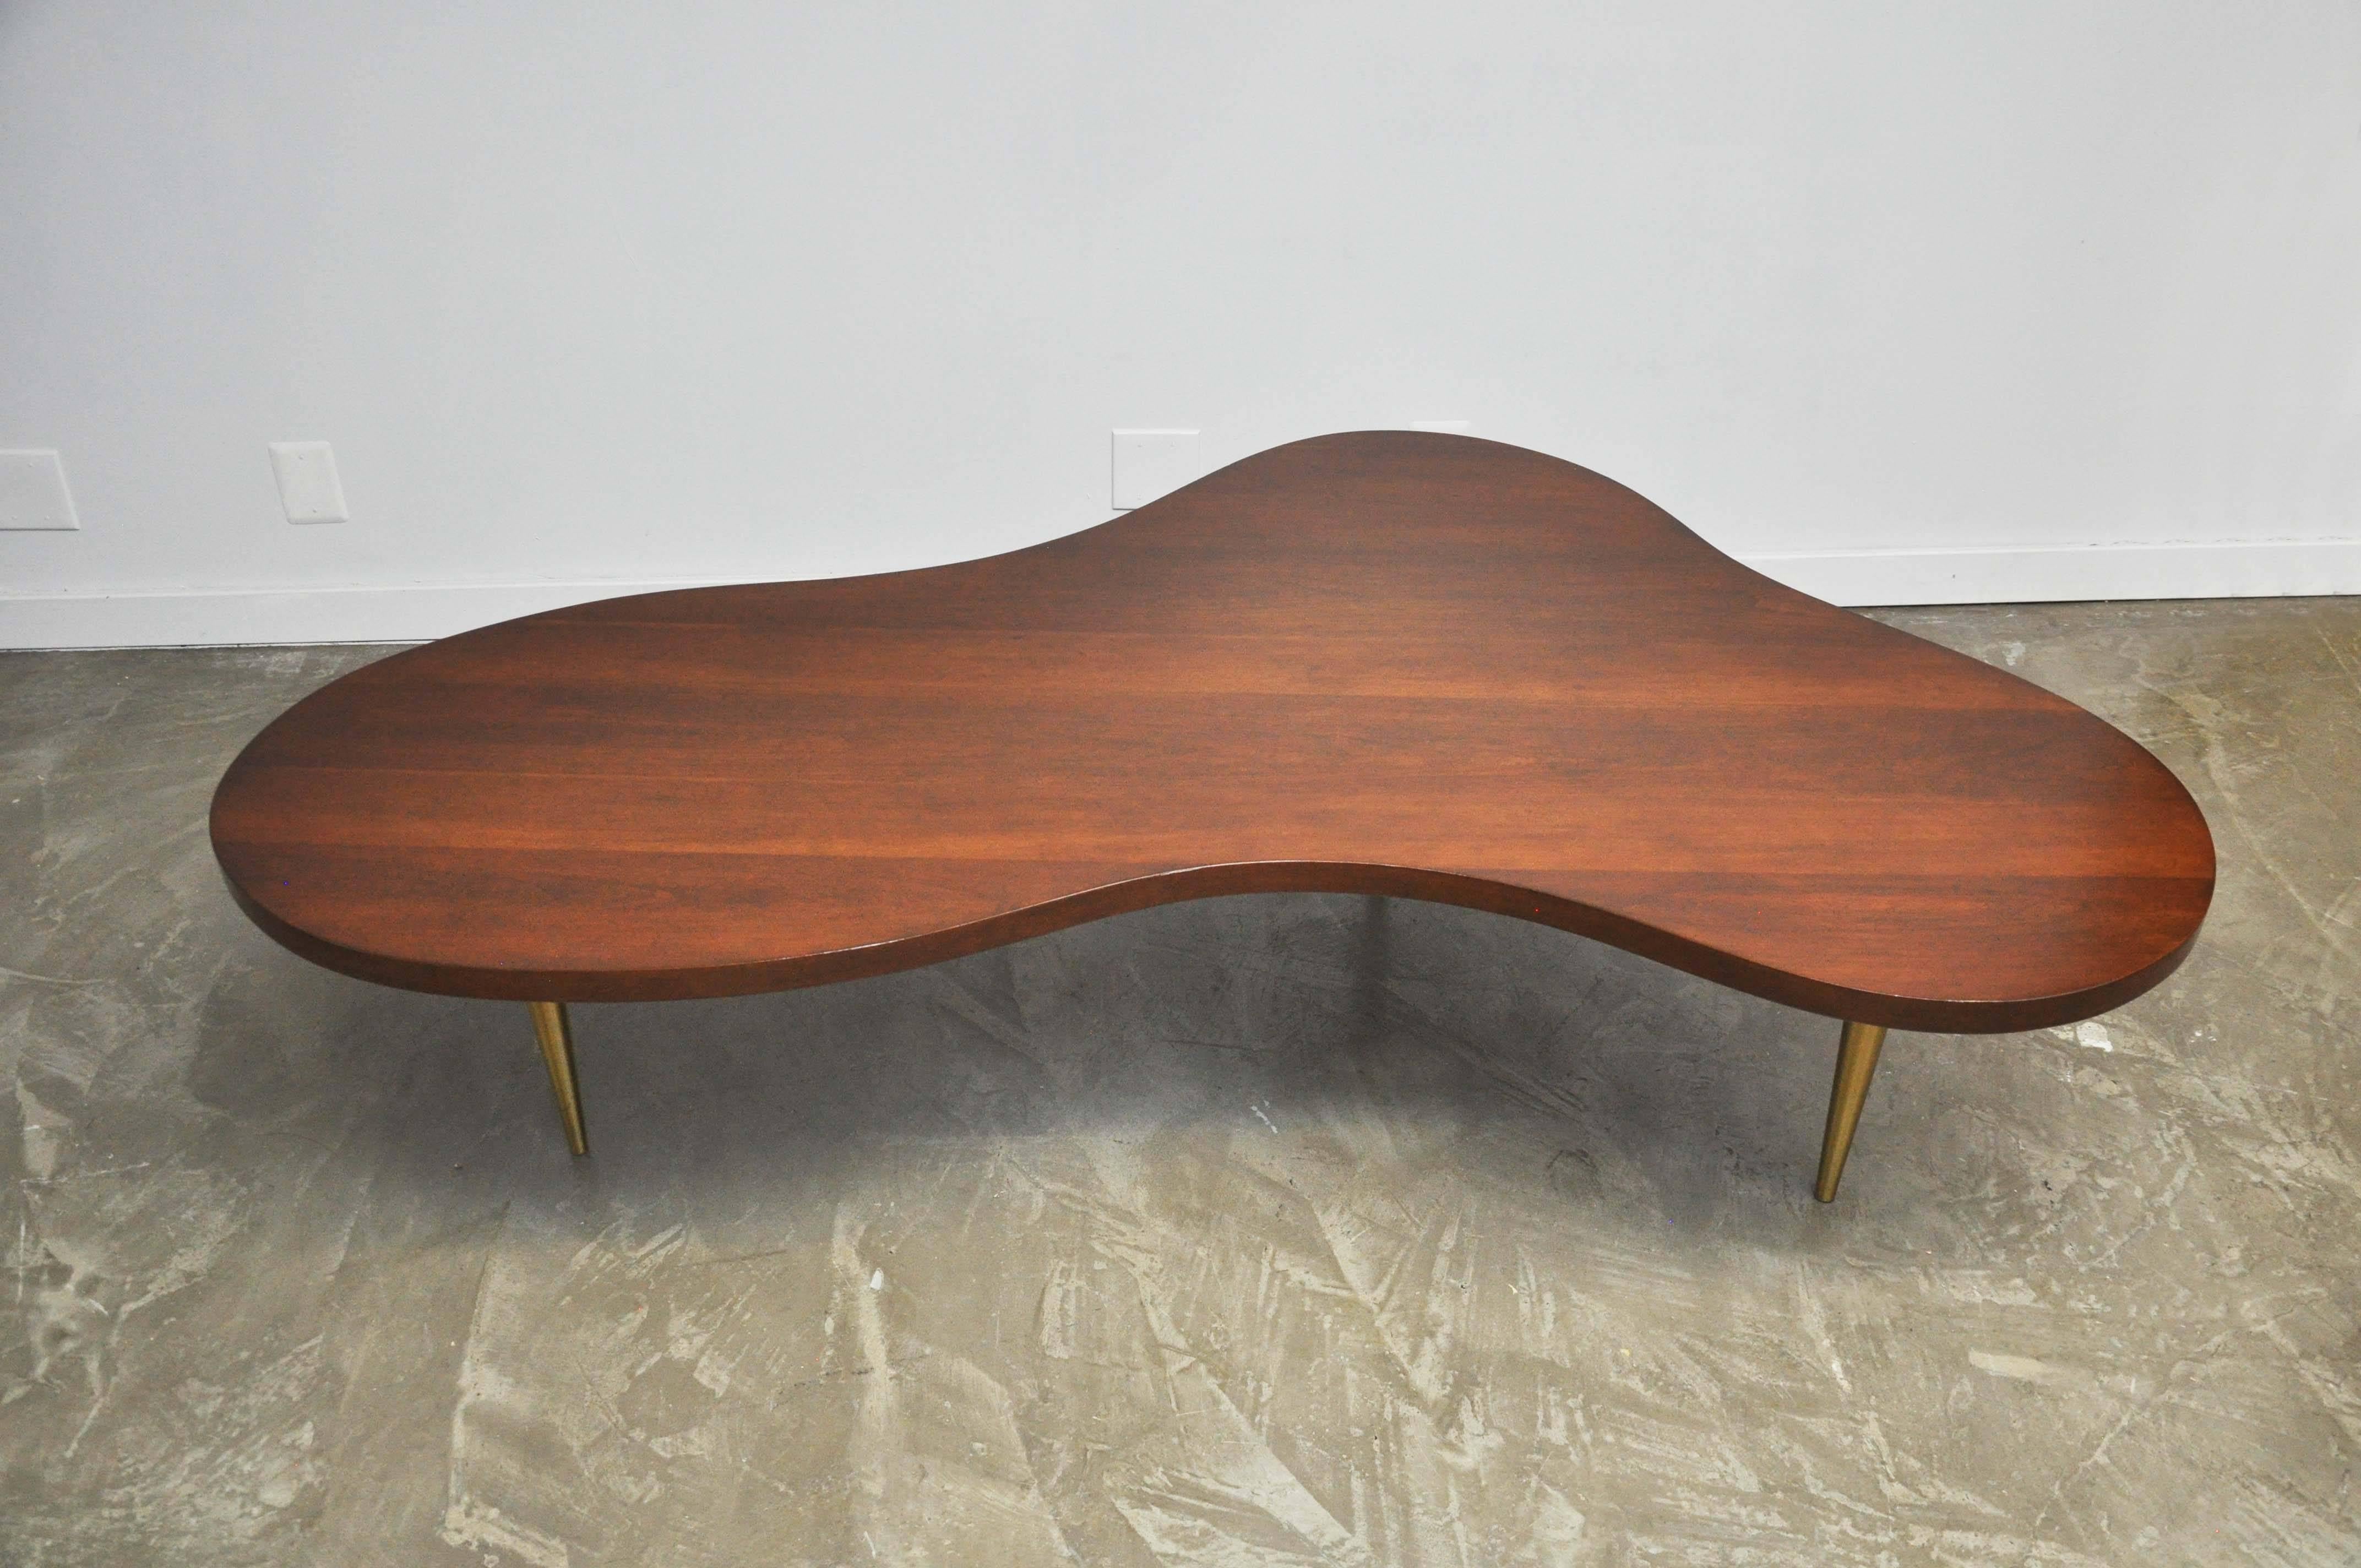 Early walnut biomorphic free-form coffee table with tapered brass legs designed by T.H. Robsjohn-Gibbings for Widdicomb, circa 1950s. Labeled. Very rare monumental scale at 72